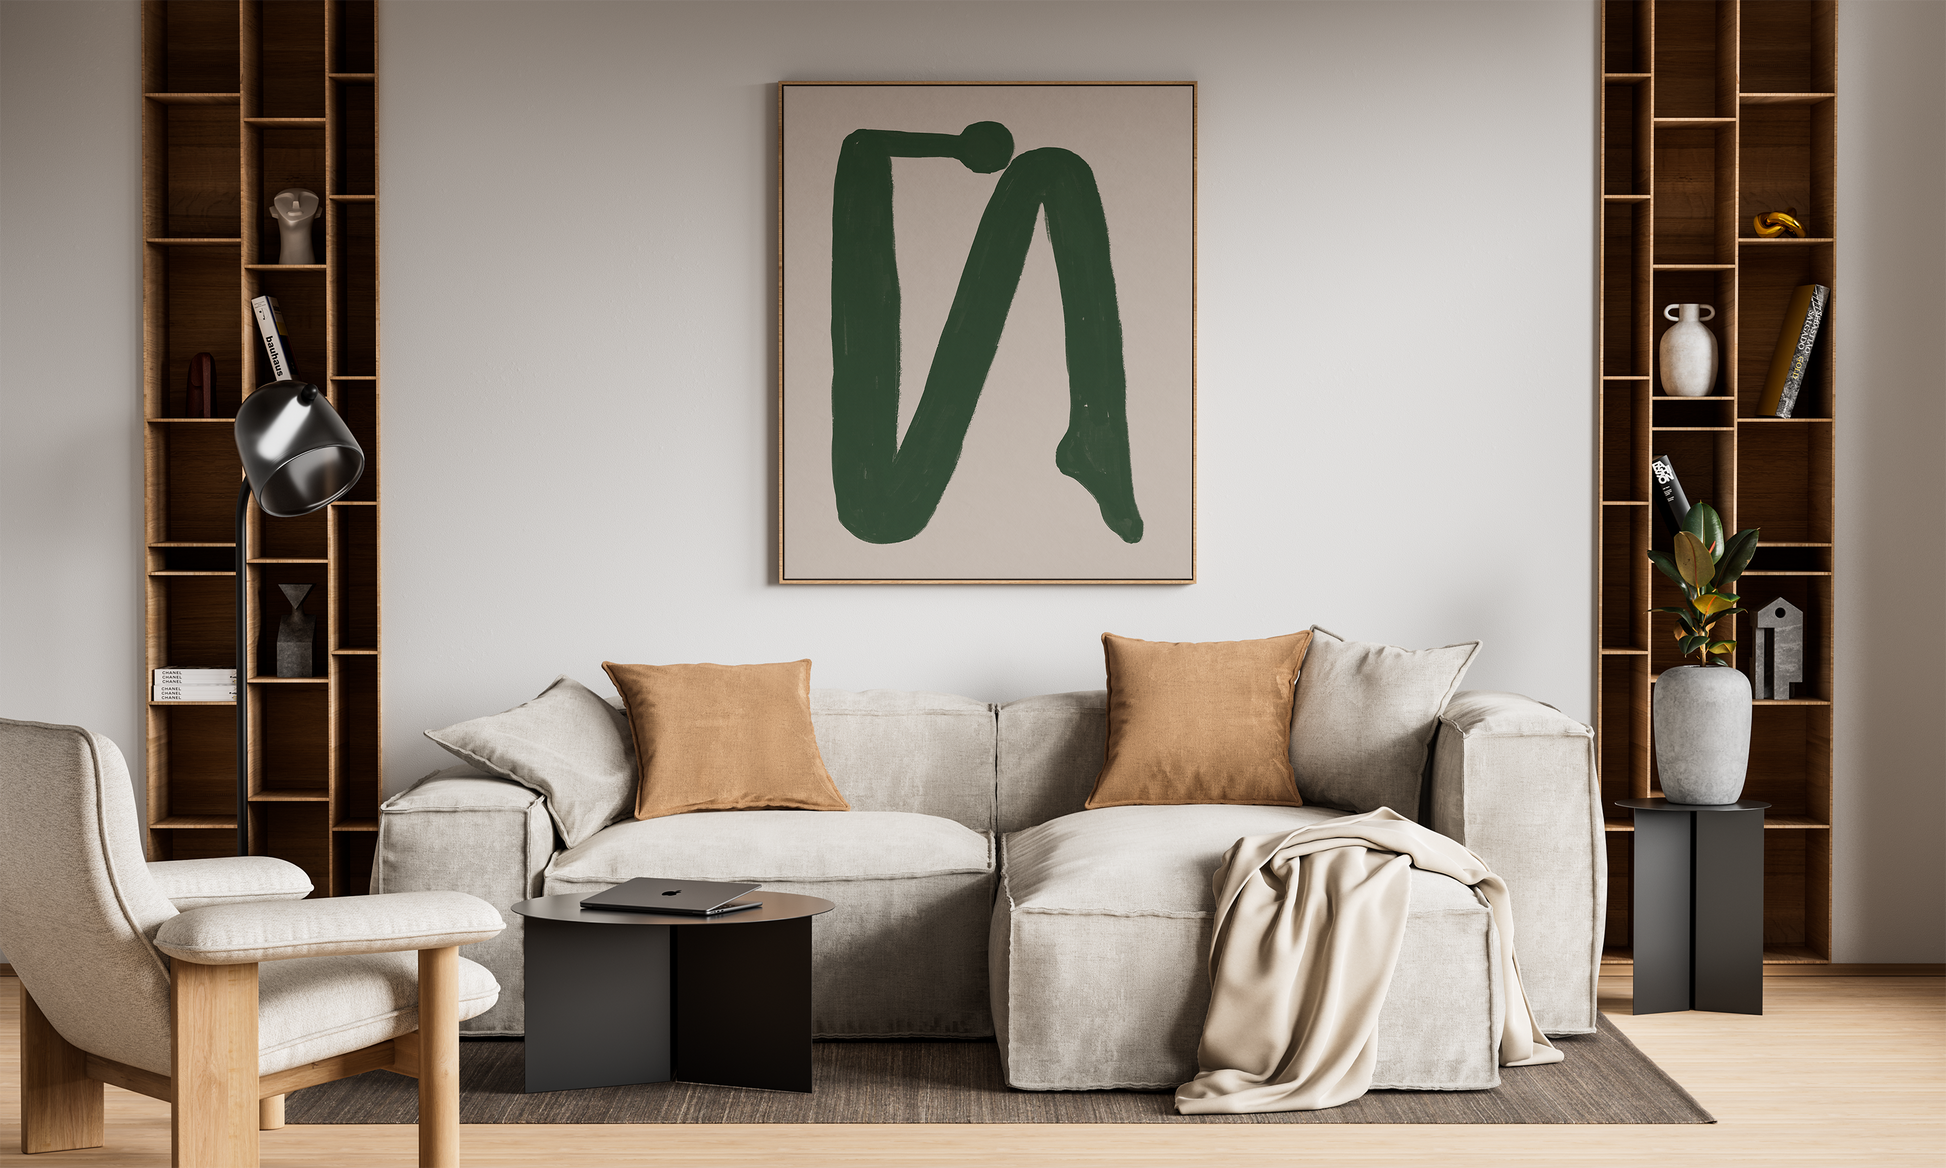 A chic living space furnished with a soft gray sofa and two abstract framed paintings, one with a prominent green figure, adding a touch of modern artistry.